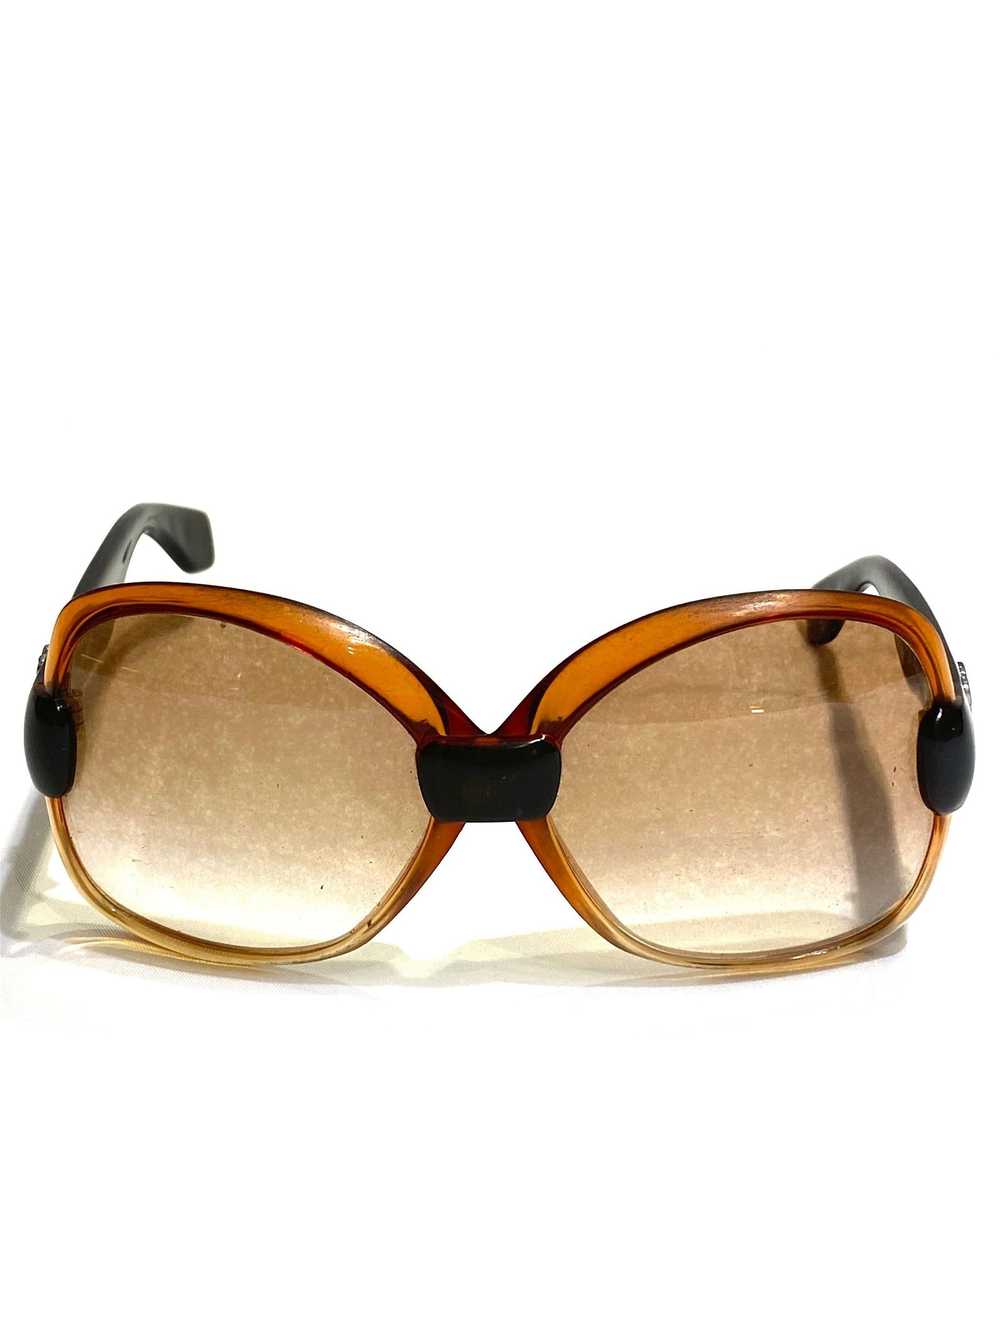 Vintage YSL Brown and Black Square Sunglasses - image 8